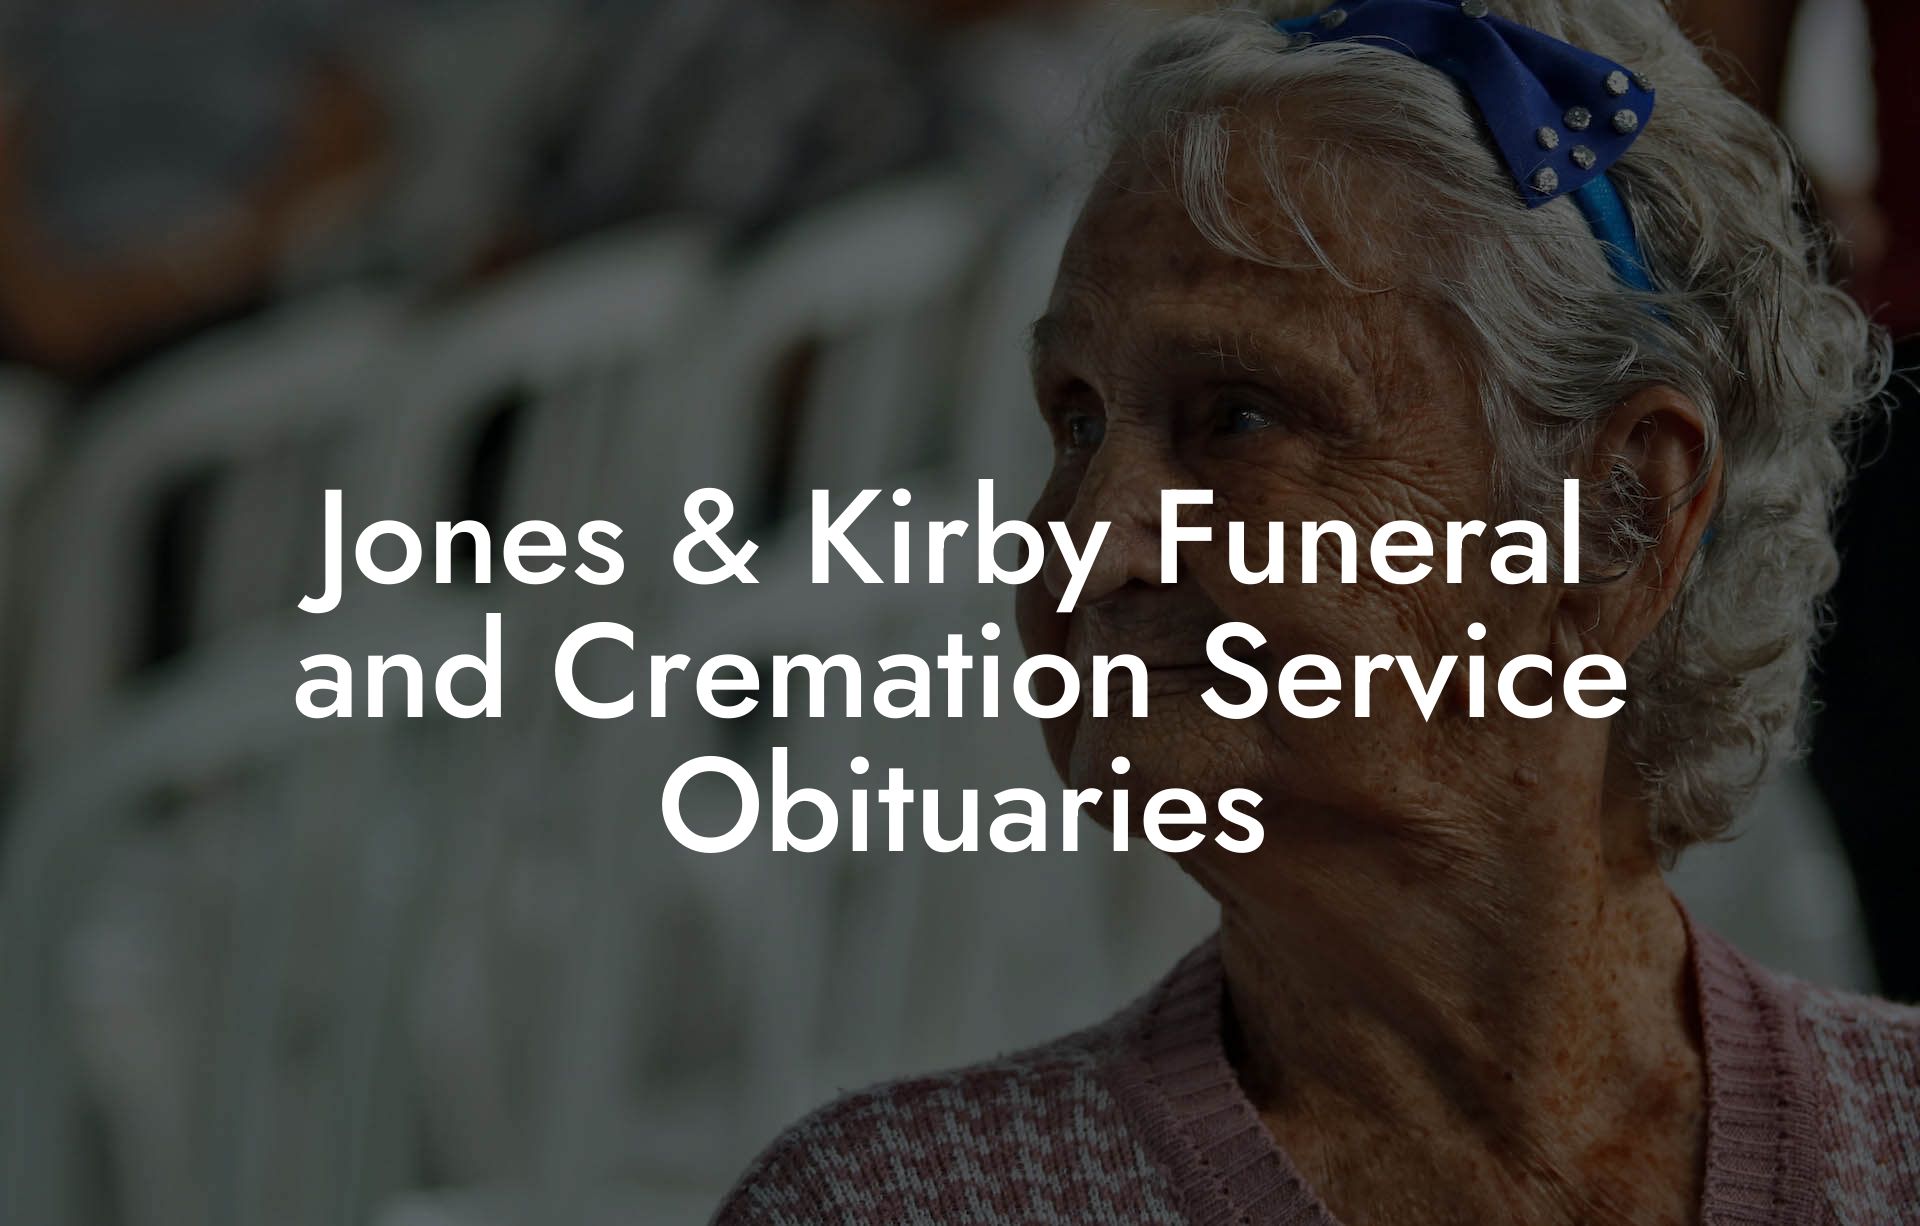 Jones & Kirby Funeral and Cremation Service Obituaries